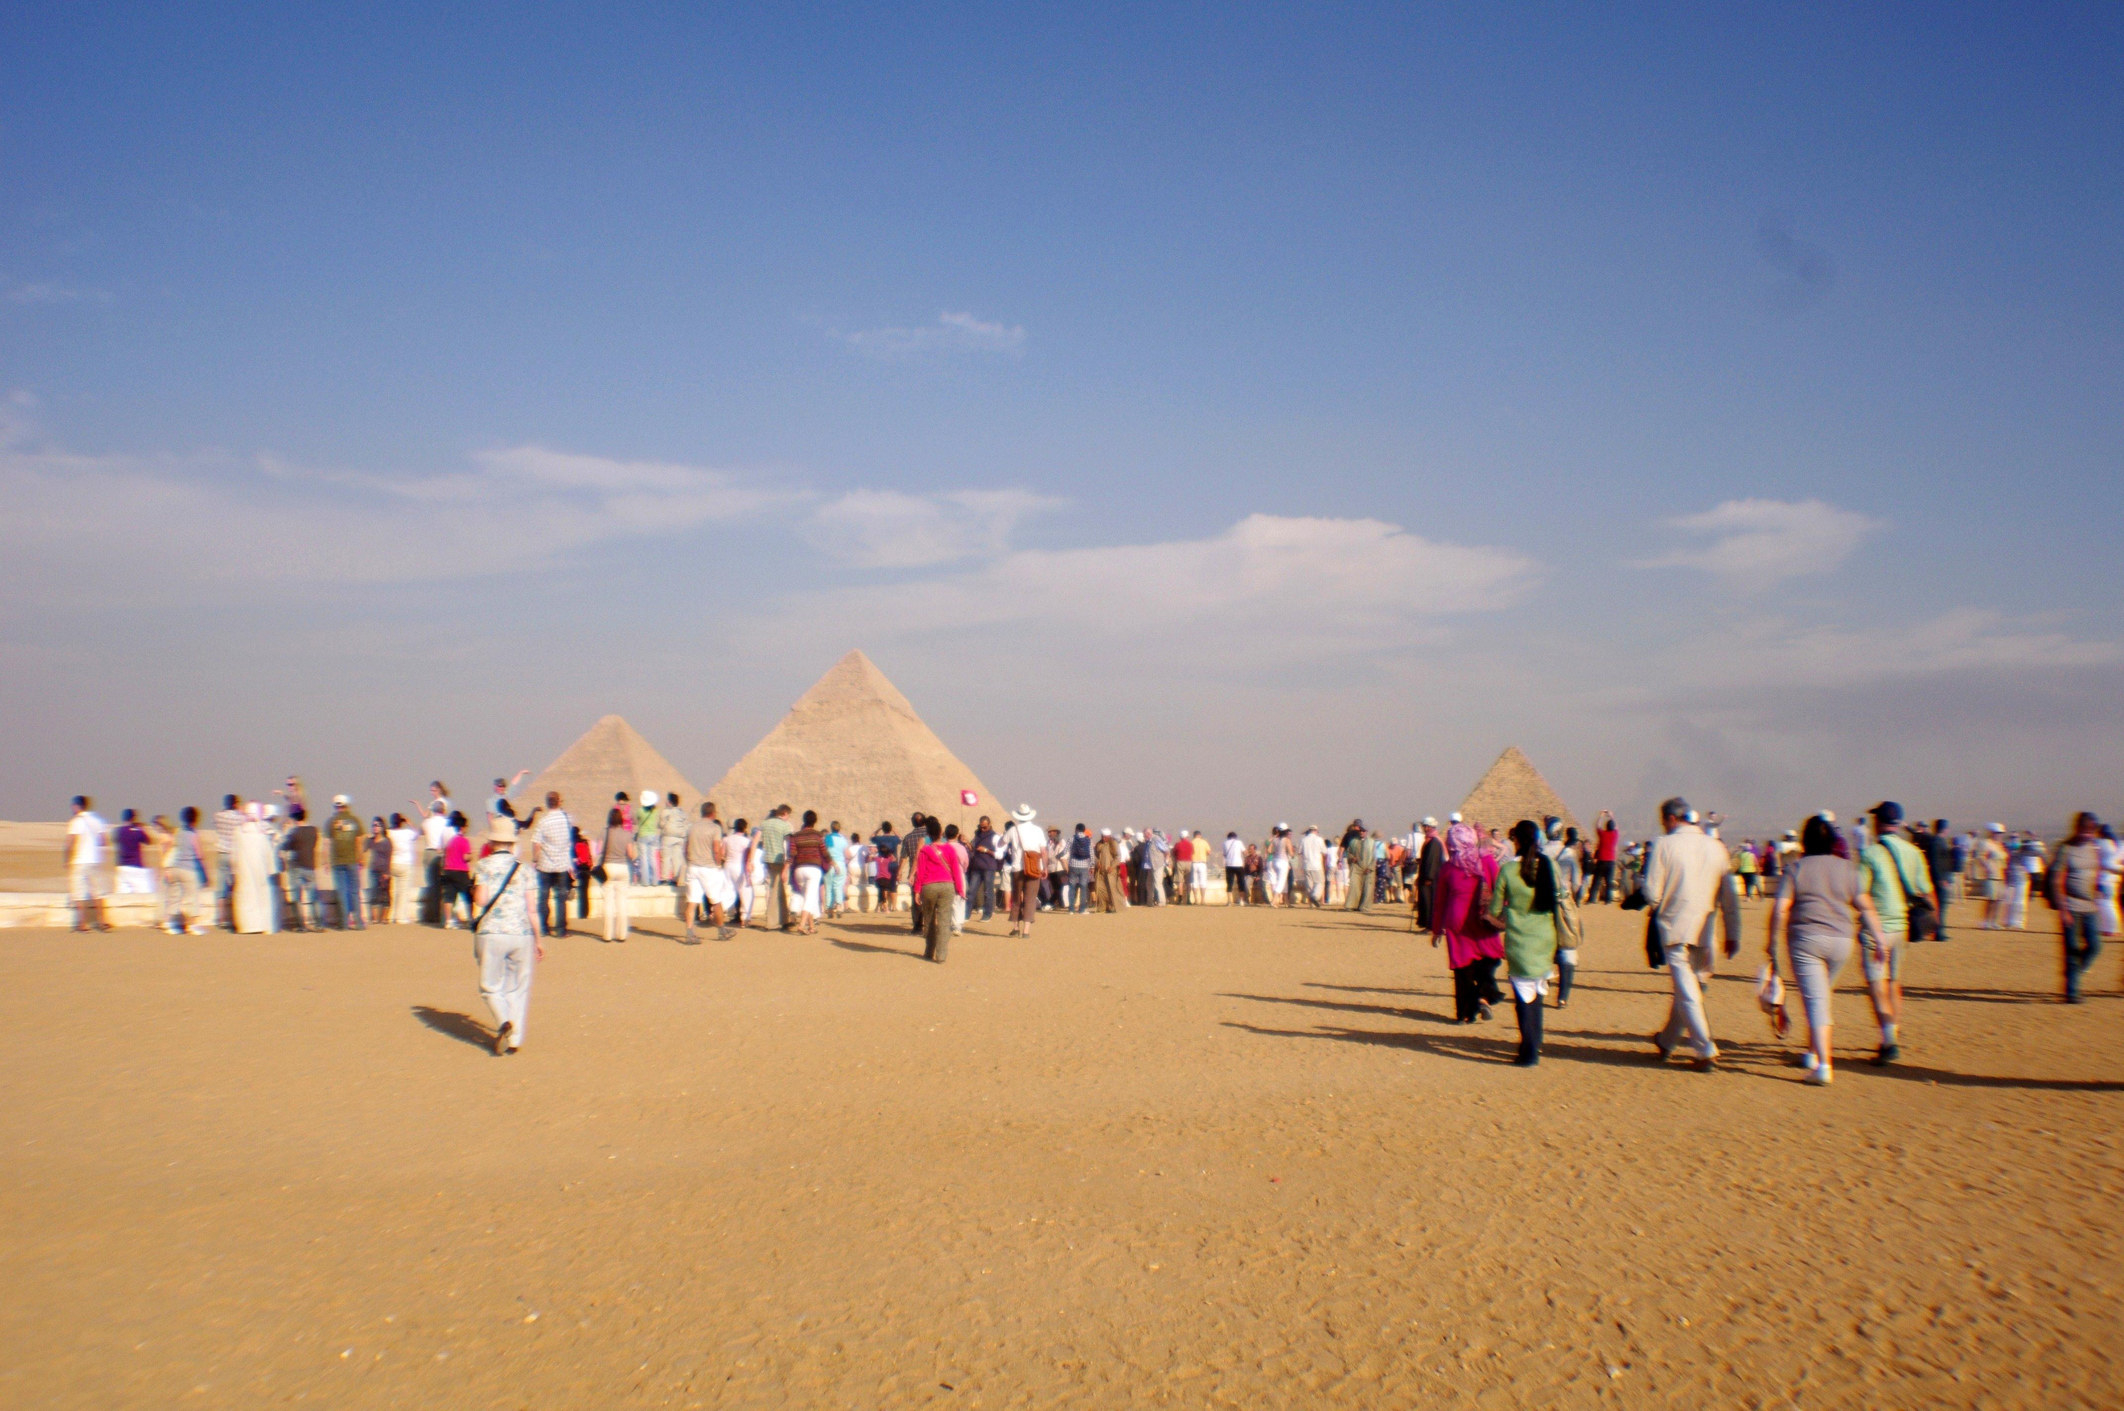 Sightseers flock to view great pyramids at Giza